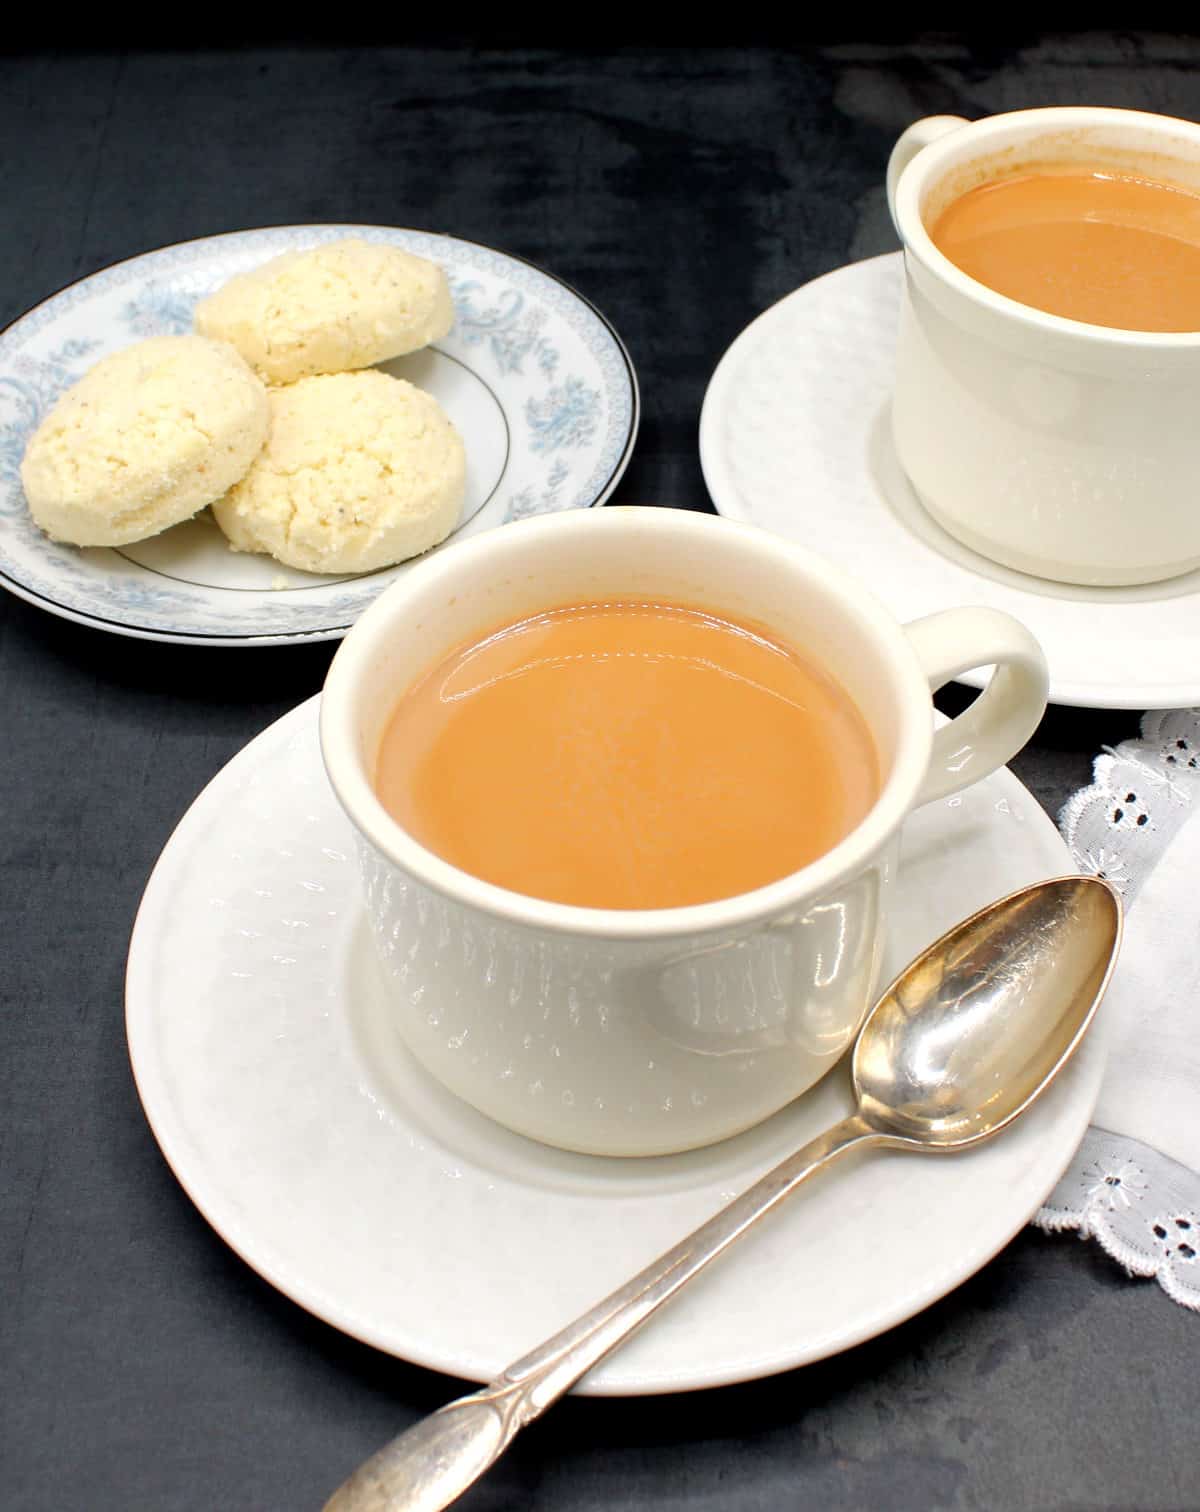 Masala chai tea in white cups and saucers with a plate of nankhatai biscuits in background.